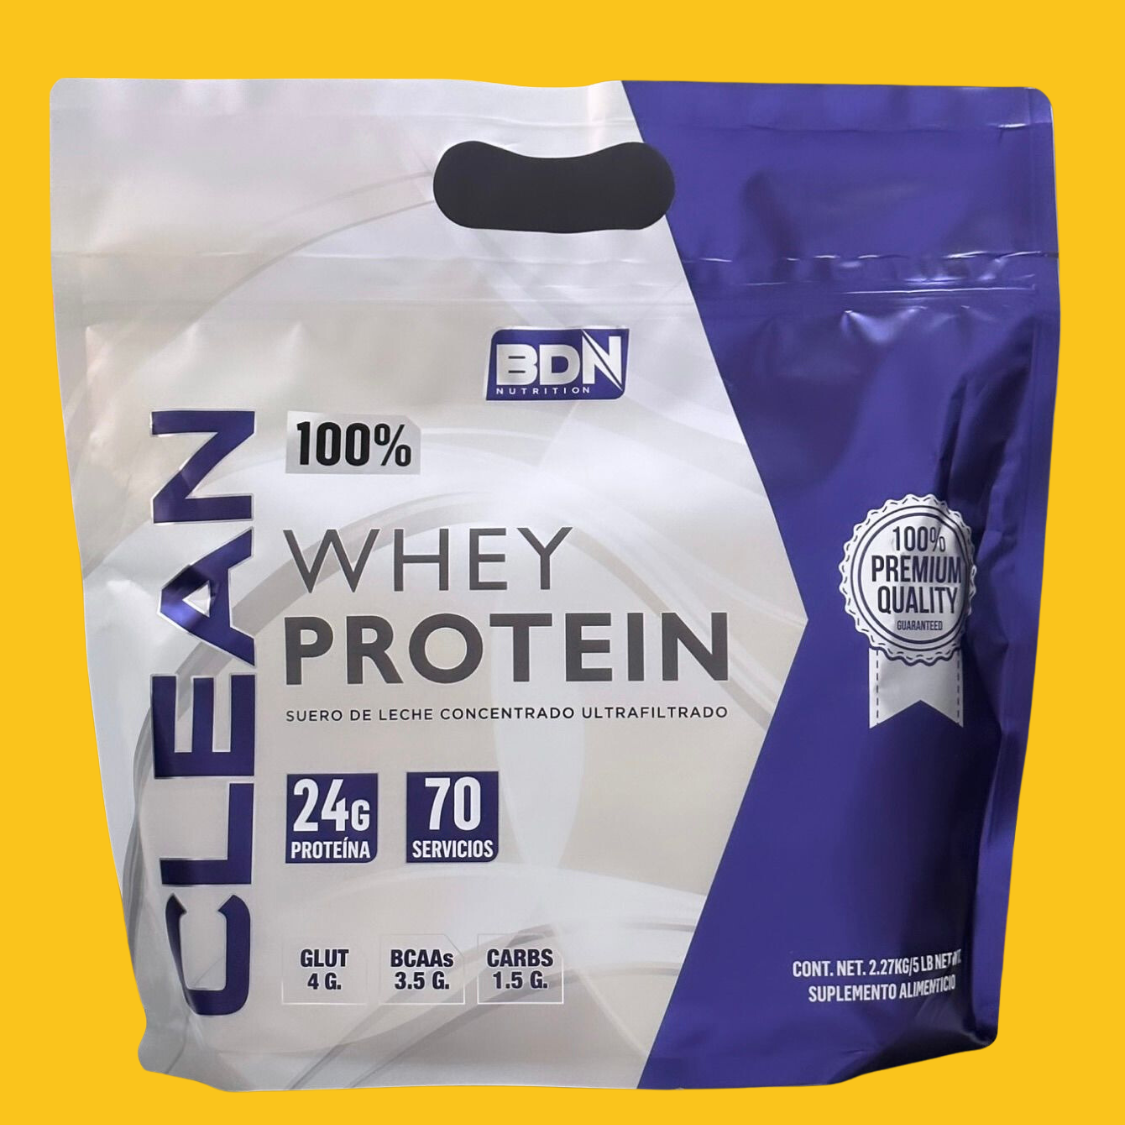 CLEAN WHEY PROTEIN COSTAL 5 LBS BDN